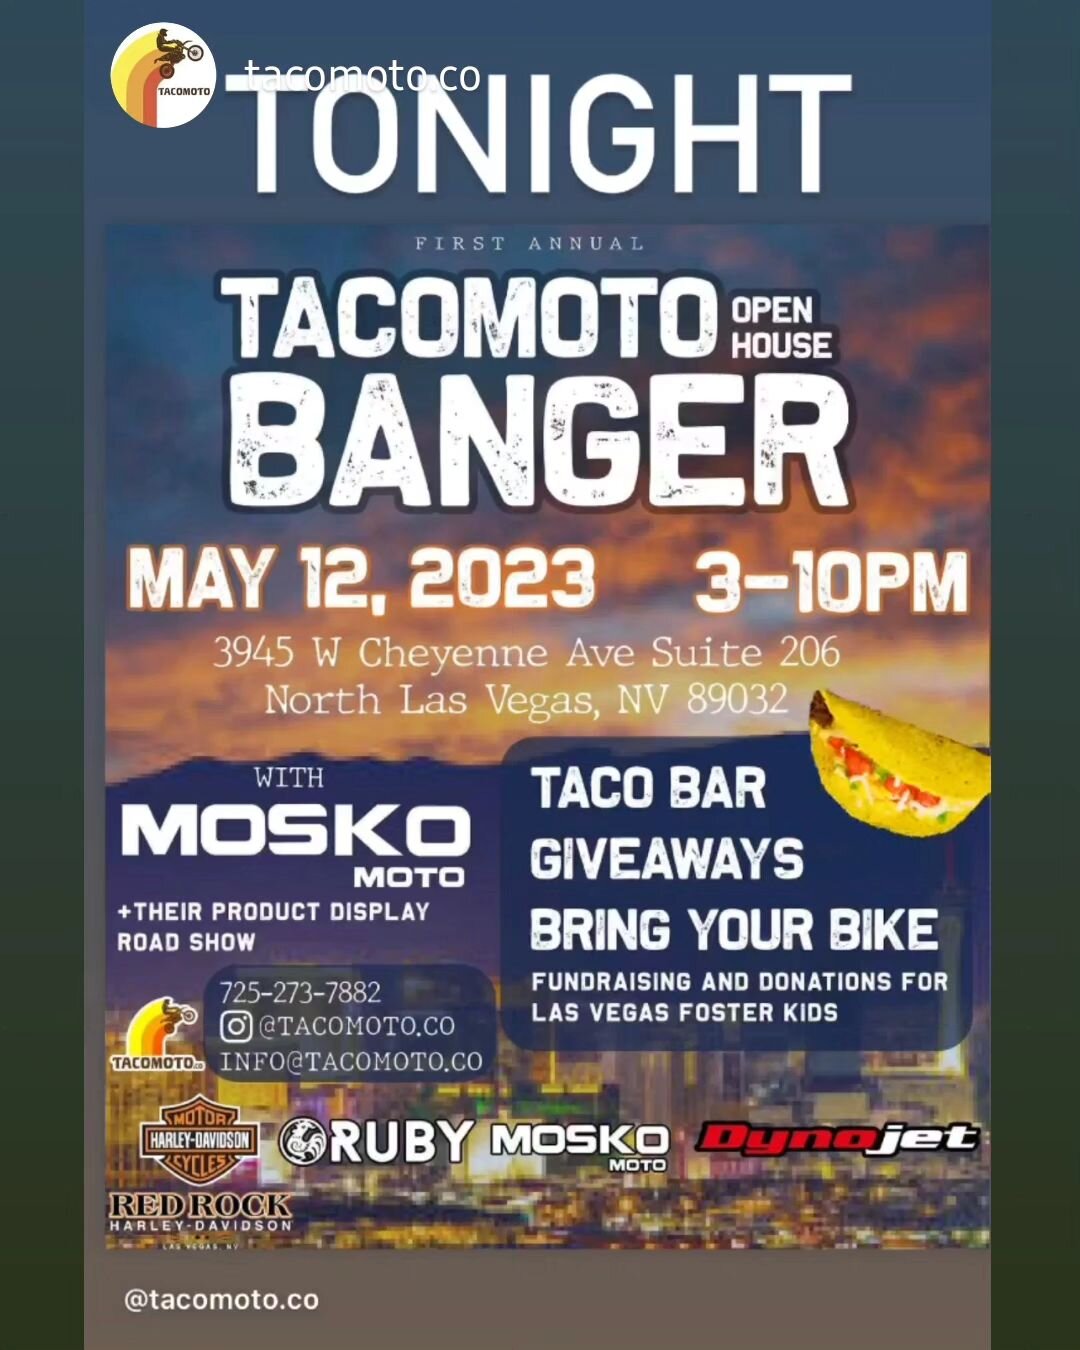 Hey everyone, we will be closing at 4:30 today because we will be at the Taco Moto open house! Make sure to come down and check it out! We will be there answering any questions and just enjoying the evening! We will have a couple bikes down there too